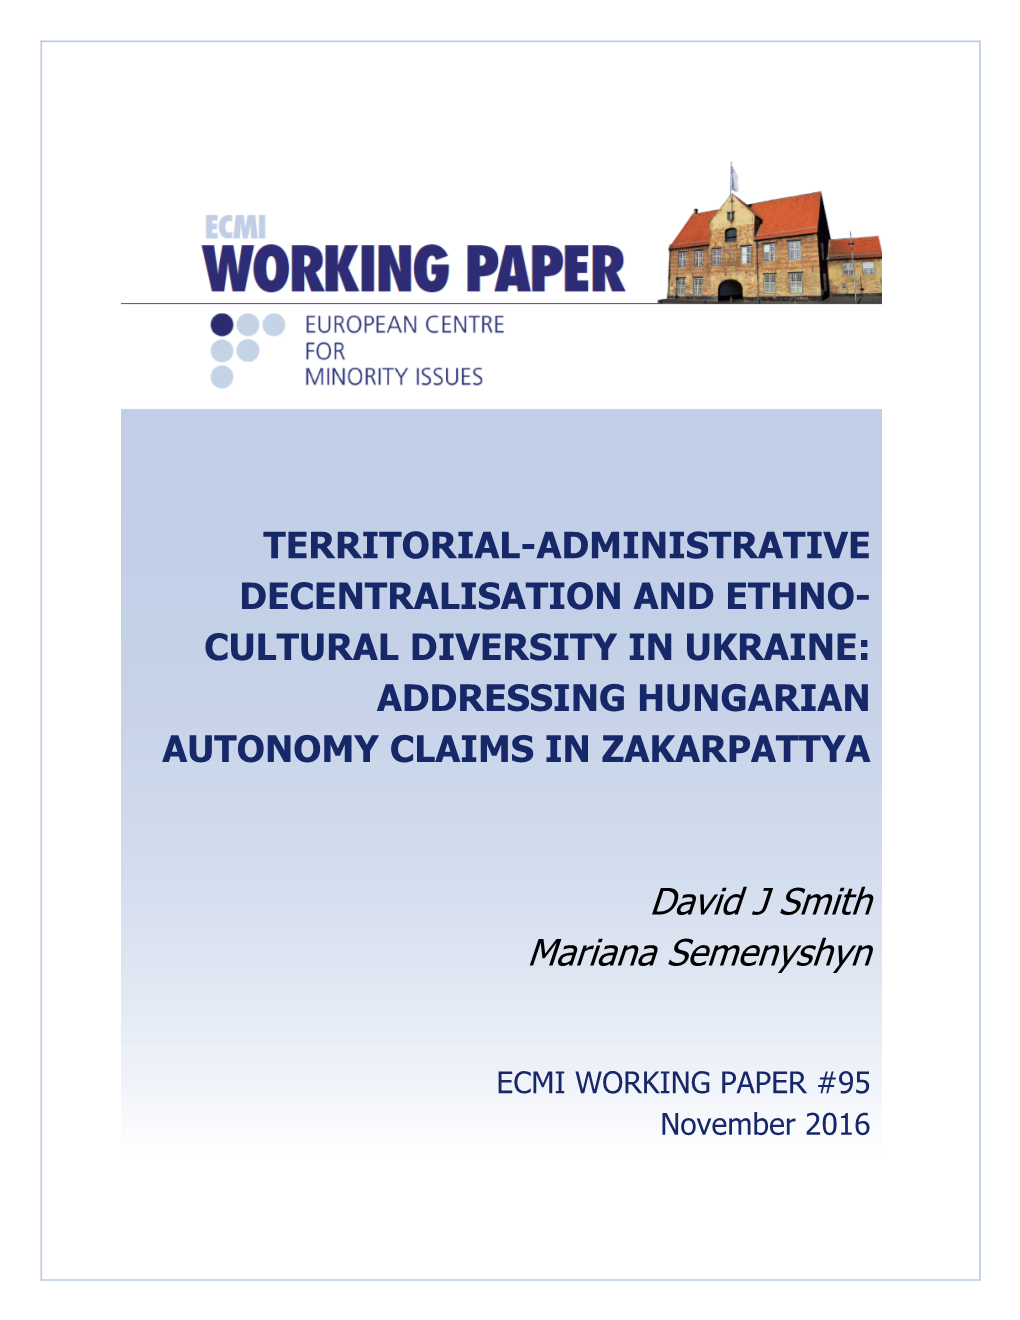 Territorial-Administrative Decentralisation and Ethno- Cultural Diversity in Ukraine: Addressing Hungarian Autonomy Claims in Zakarpattya